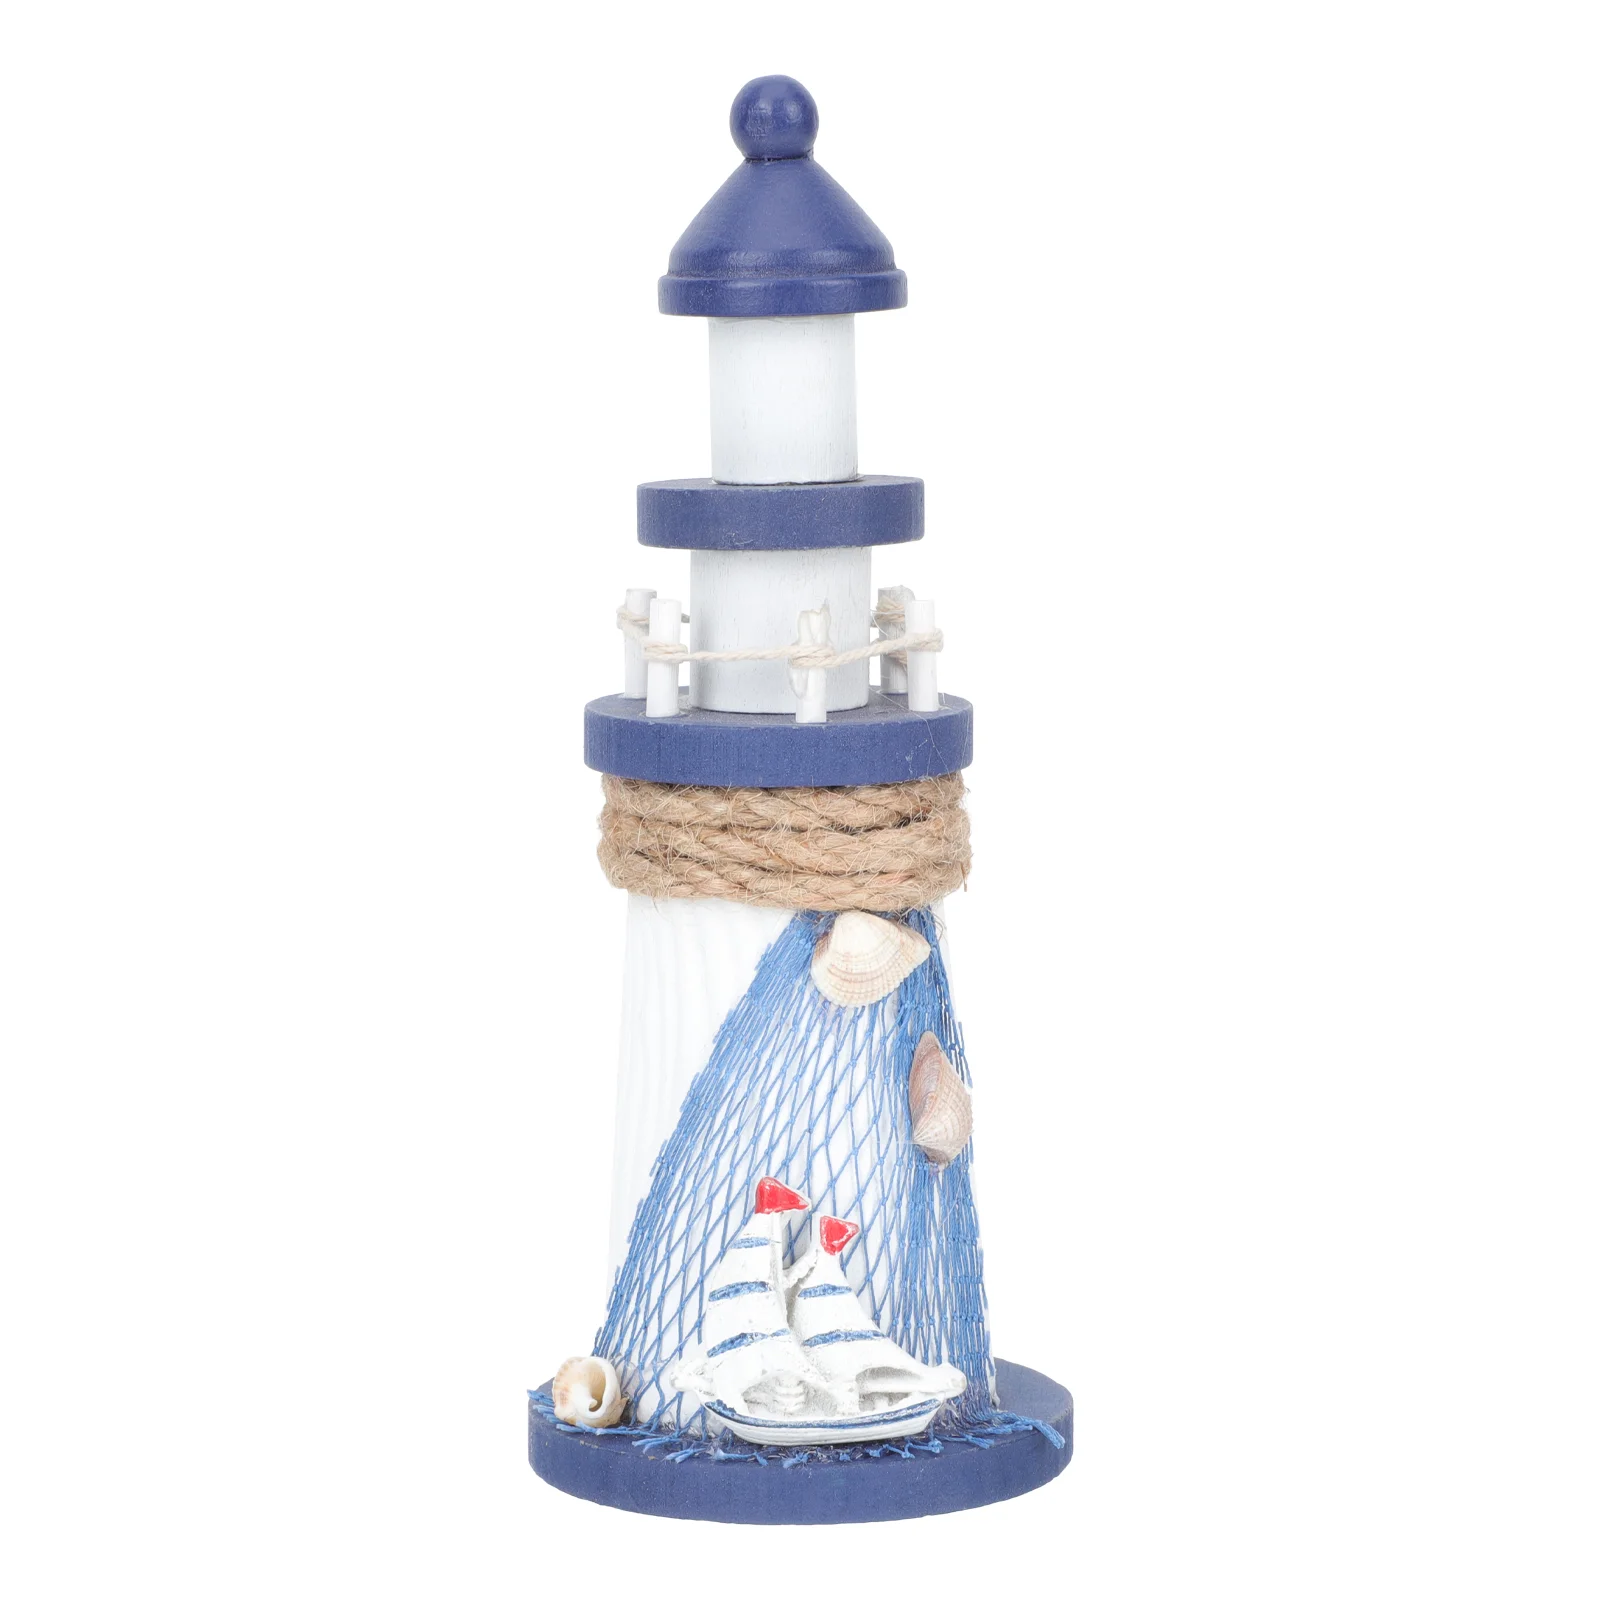 

Lighthouse Decor Nautical Mediterranean Wooden Beach Decorations Table Ornament Tabletop Home Decoration Figurines Tower Statue